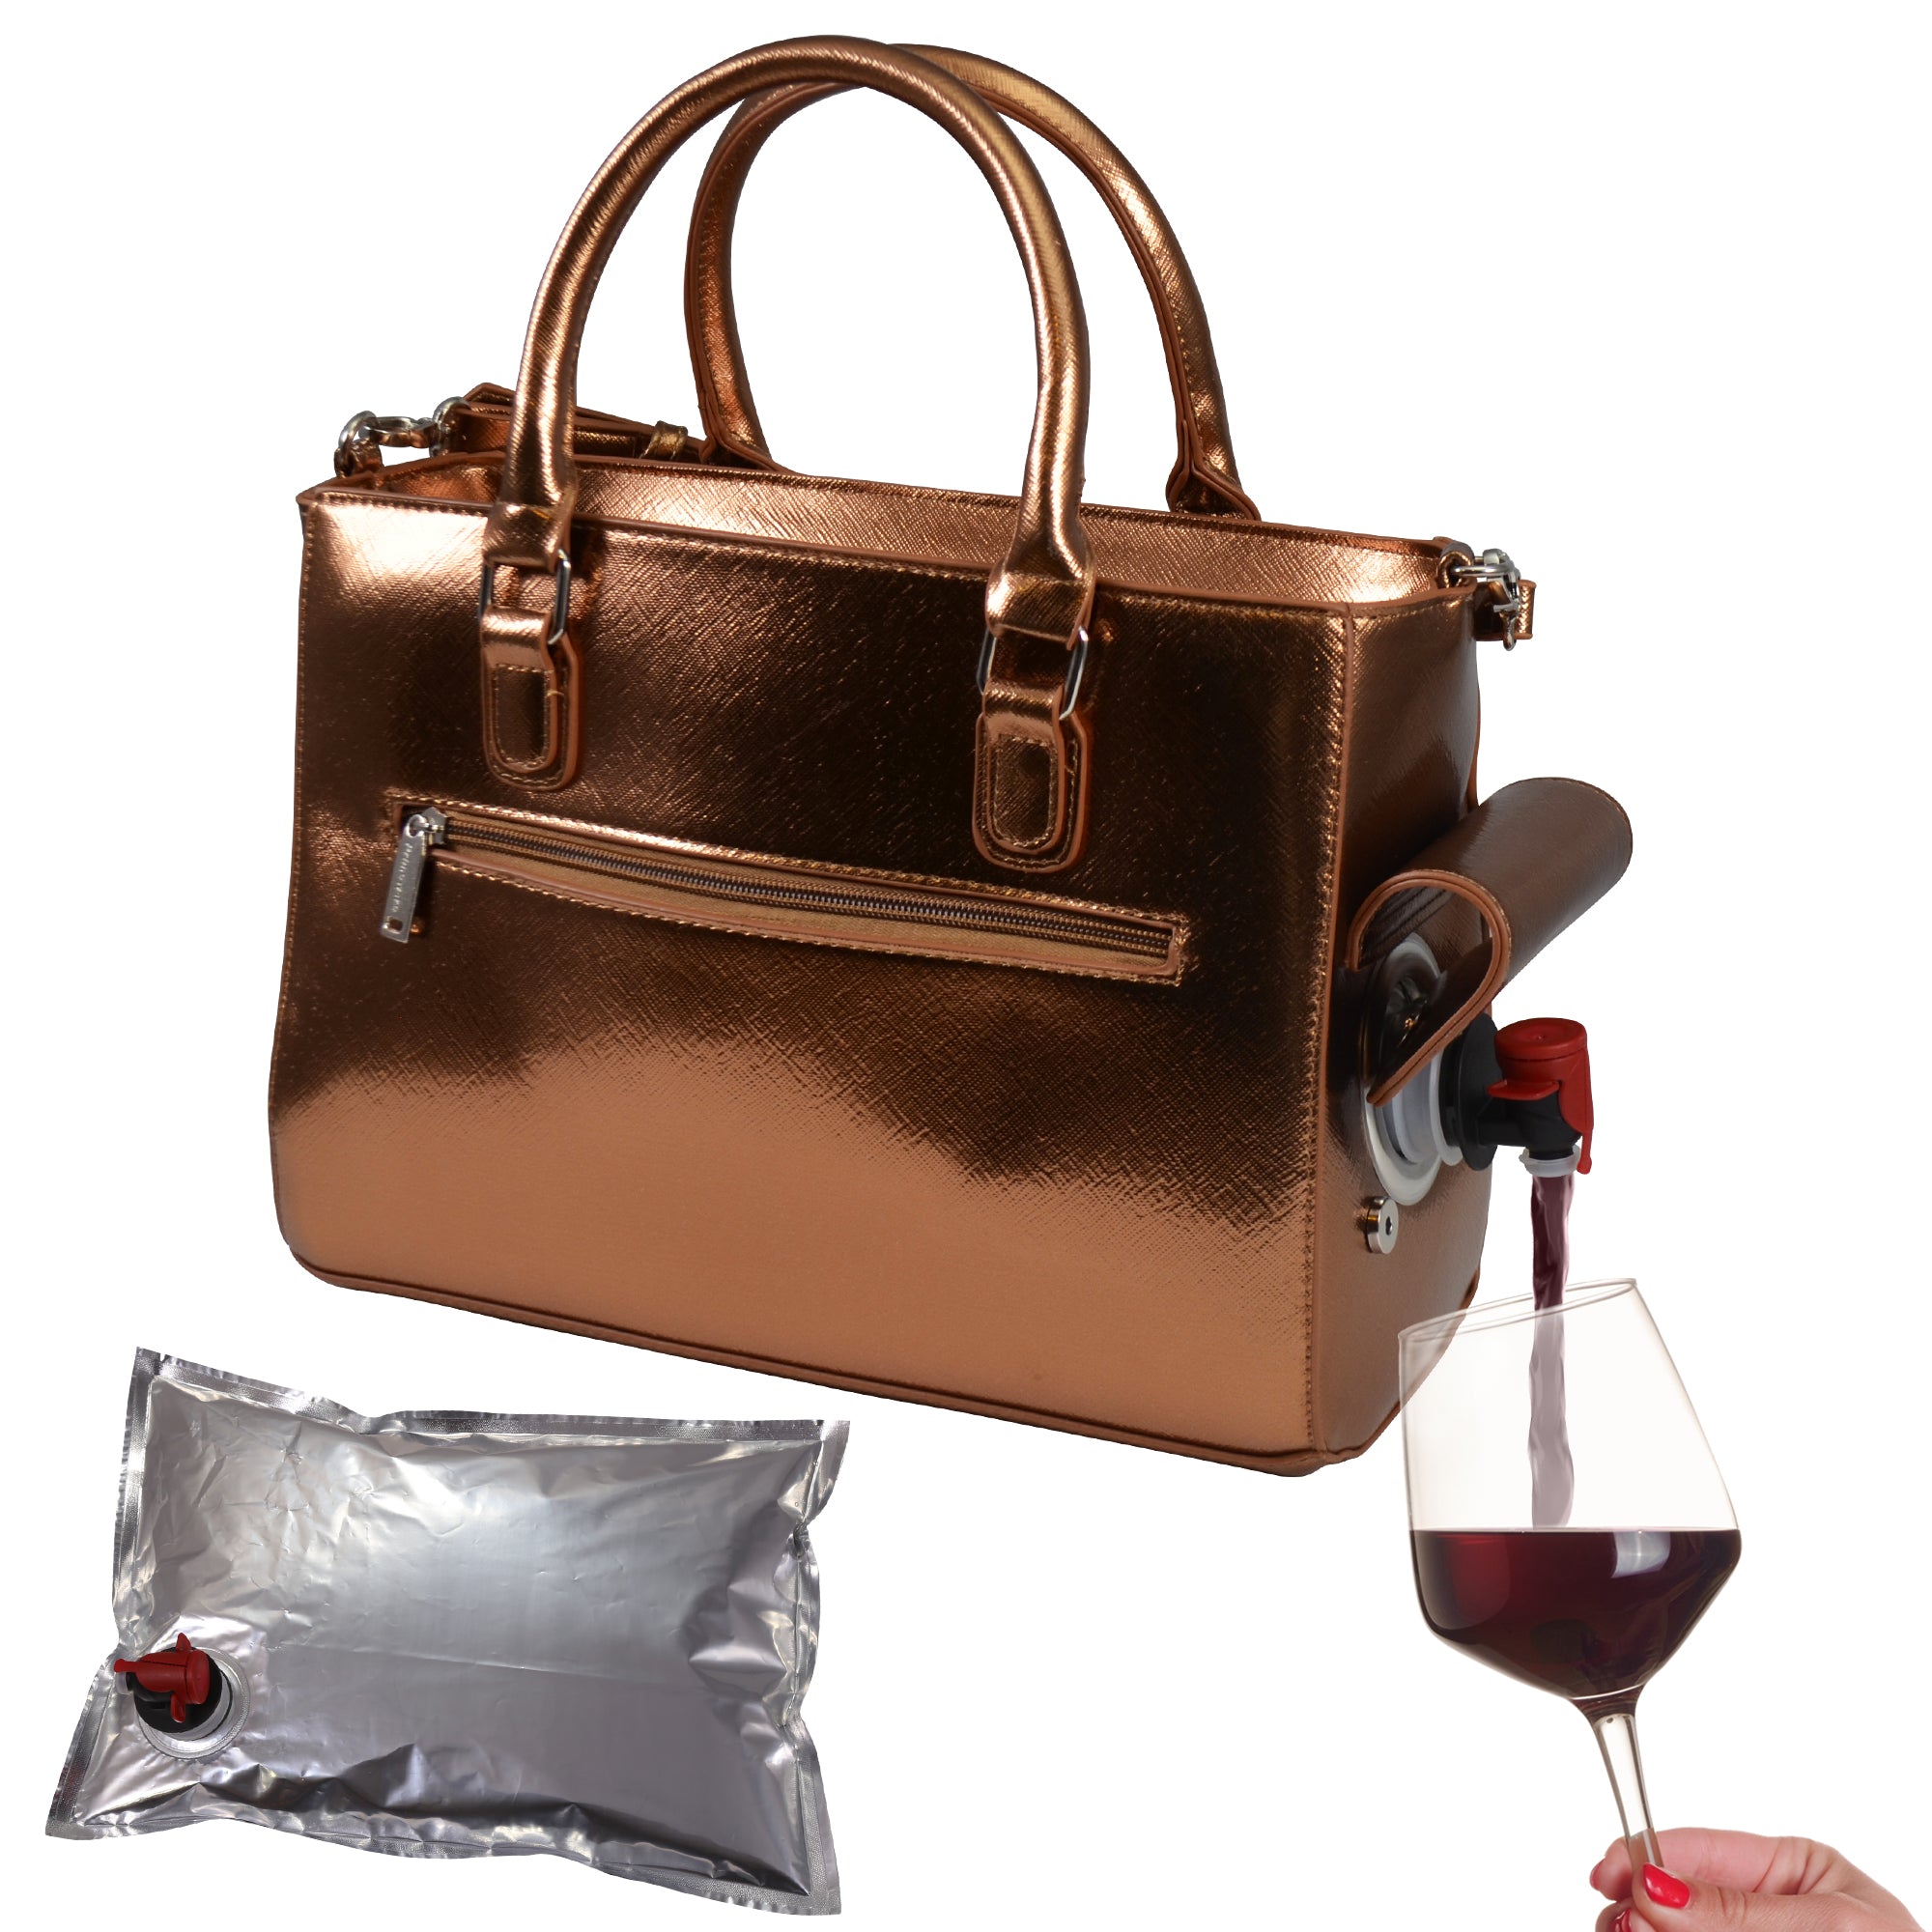 Buy PortoVino Wine Purse (Milano-Crimson) - Fashionable Purse with Hidden,  Insulated Compartment, Holds 2 Bottles of Wine! at Amazon.in